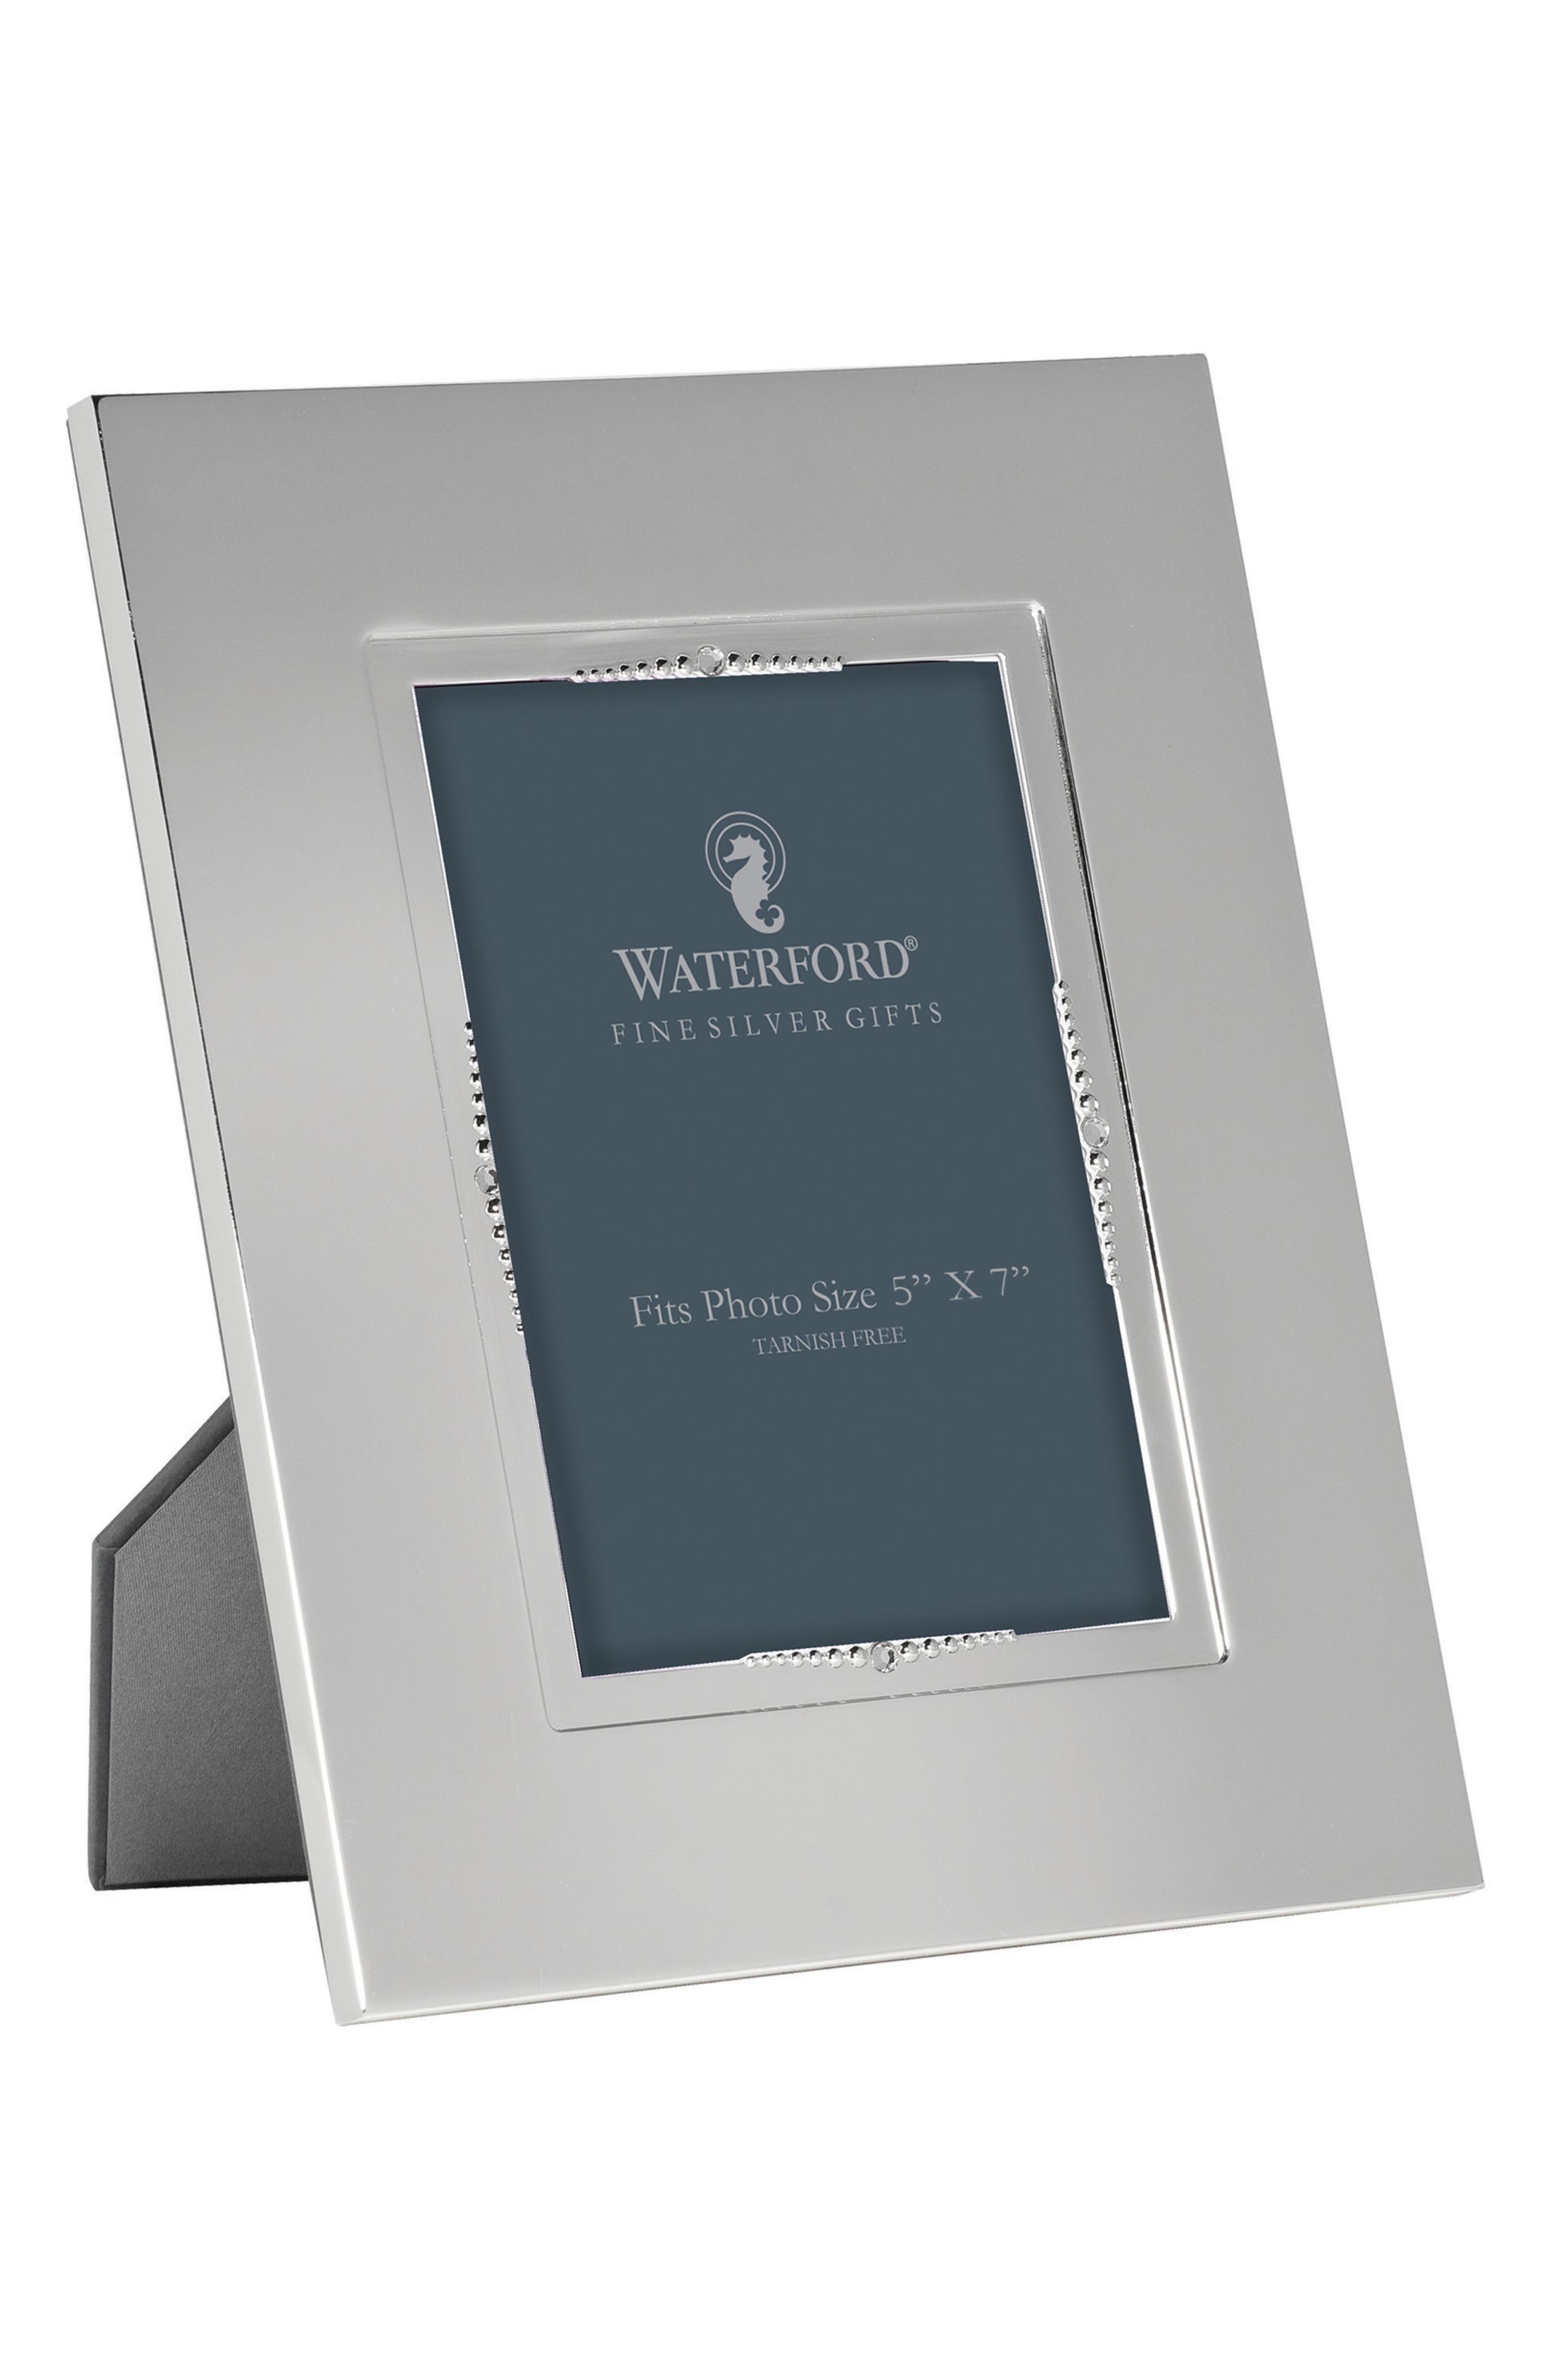 Waterford picture frame